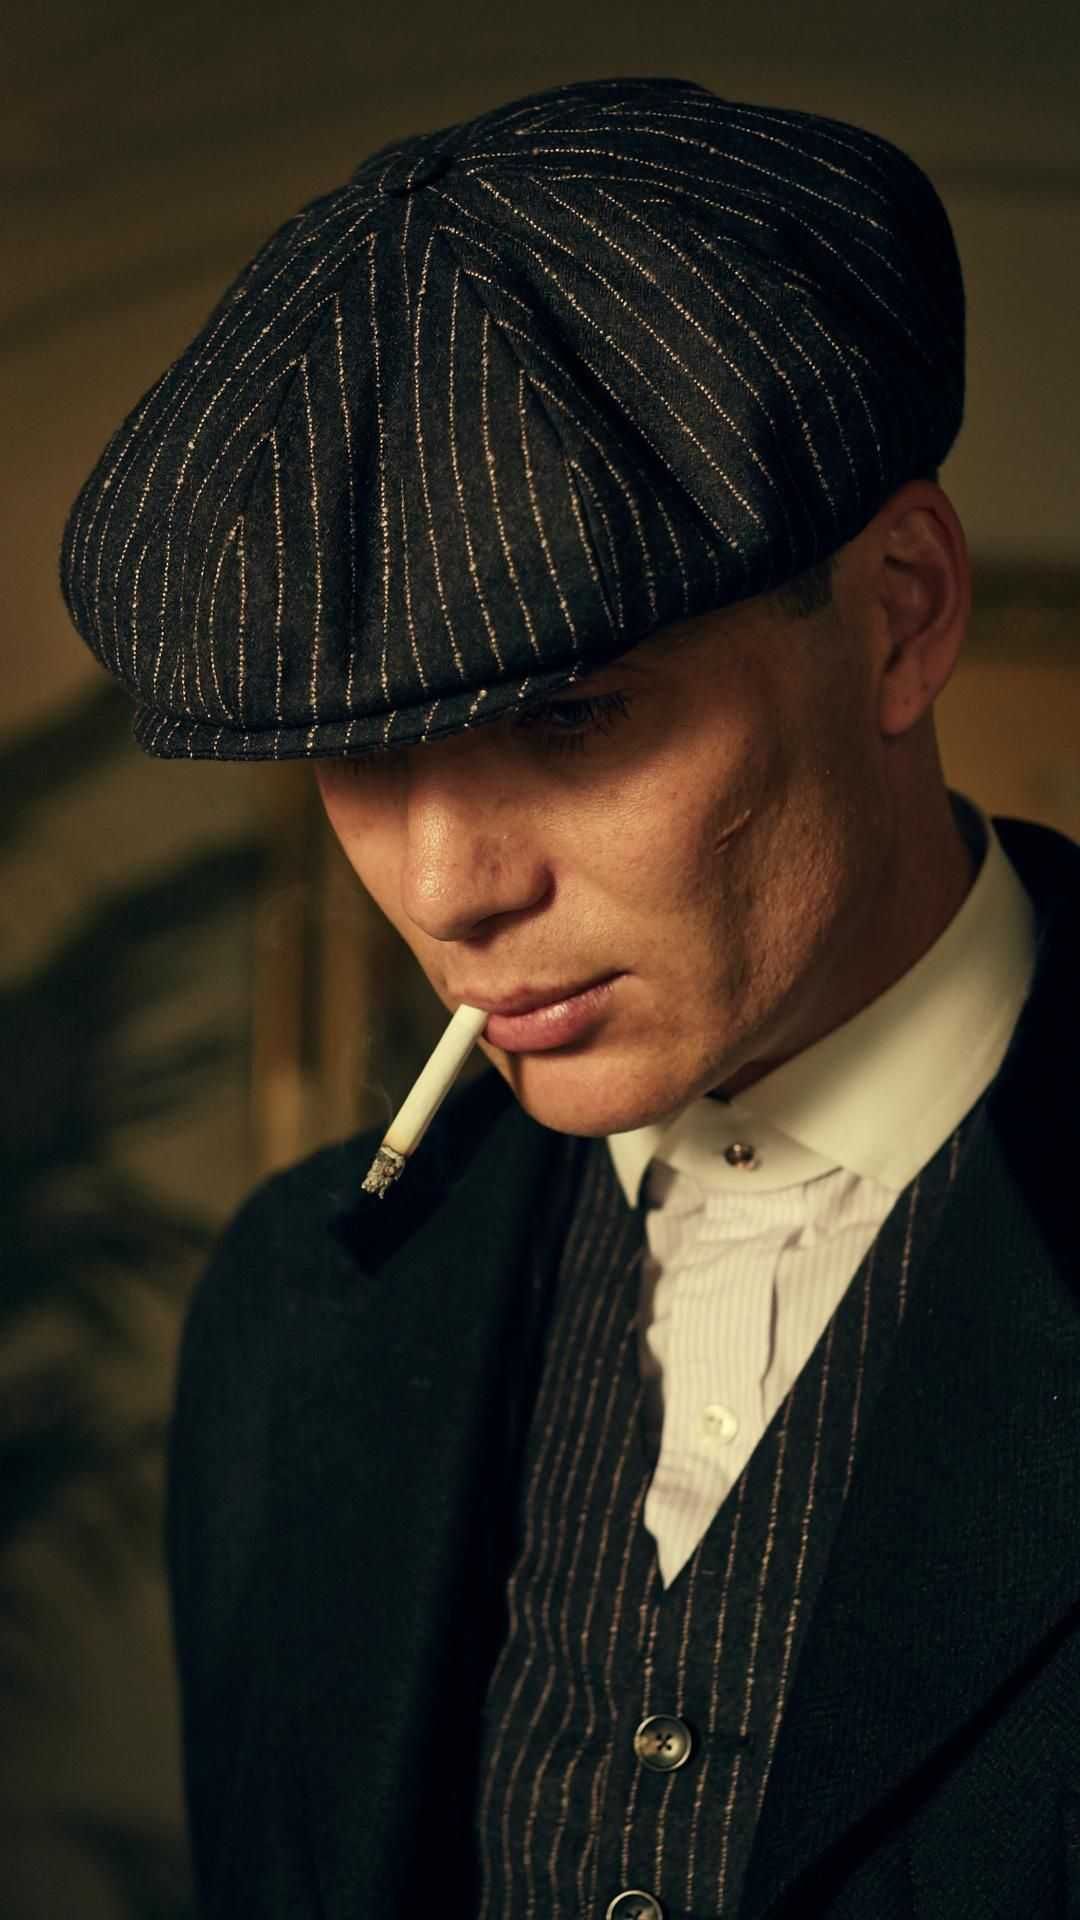 Peaky Blinders Wallpaper Discover more 1080p, android, desktop, iphone, mobile wallp. Peaky blinders wallpaper, Peaky blinders poster, Peaky blinders tommy shelby